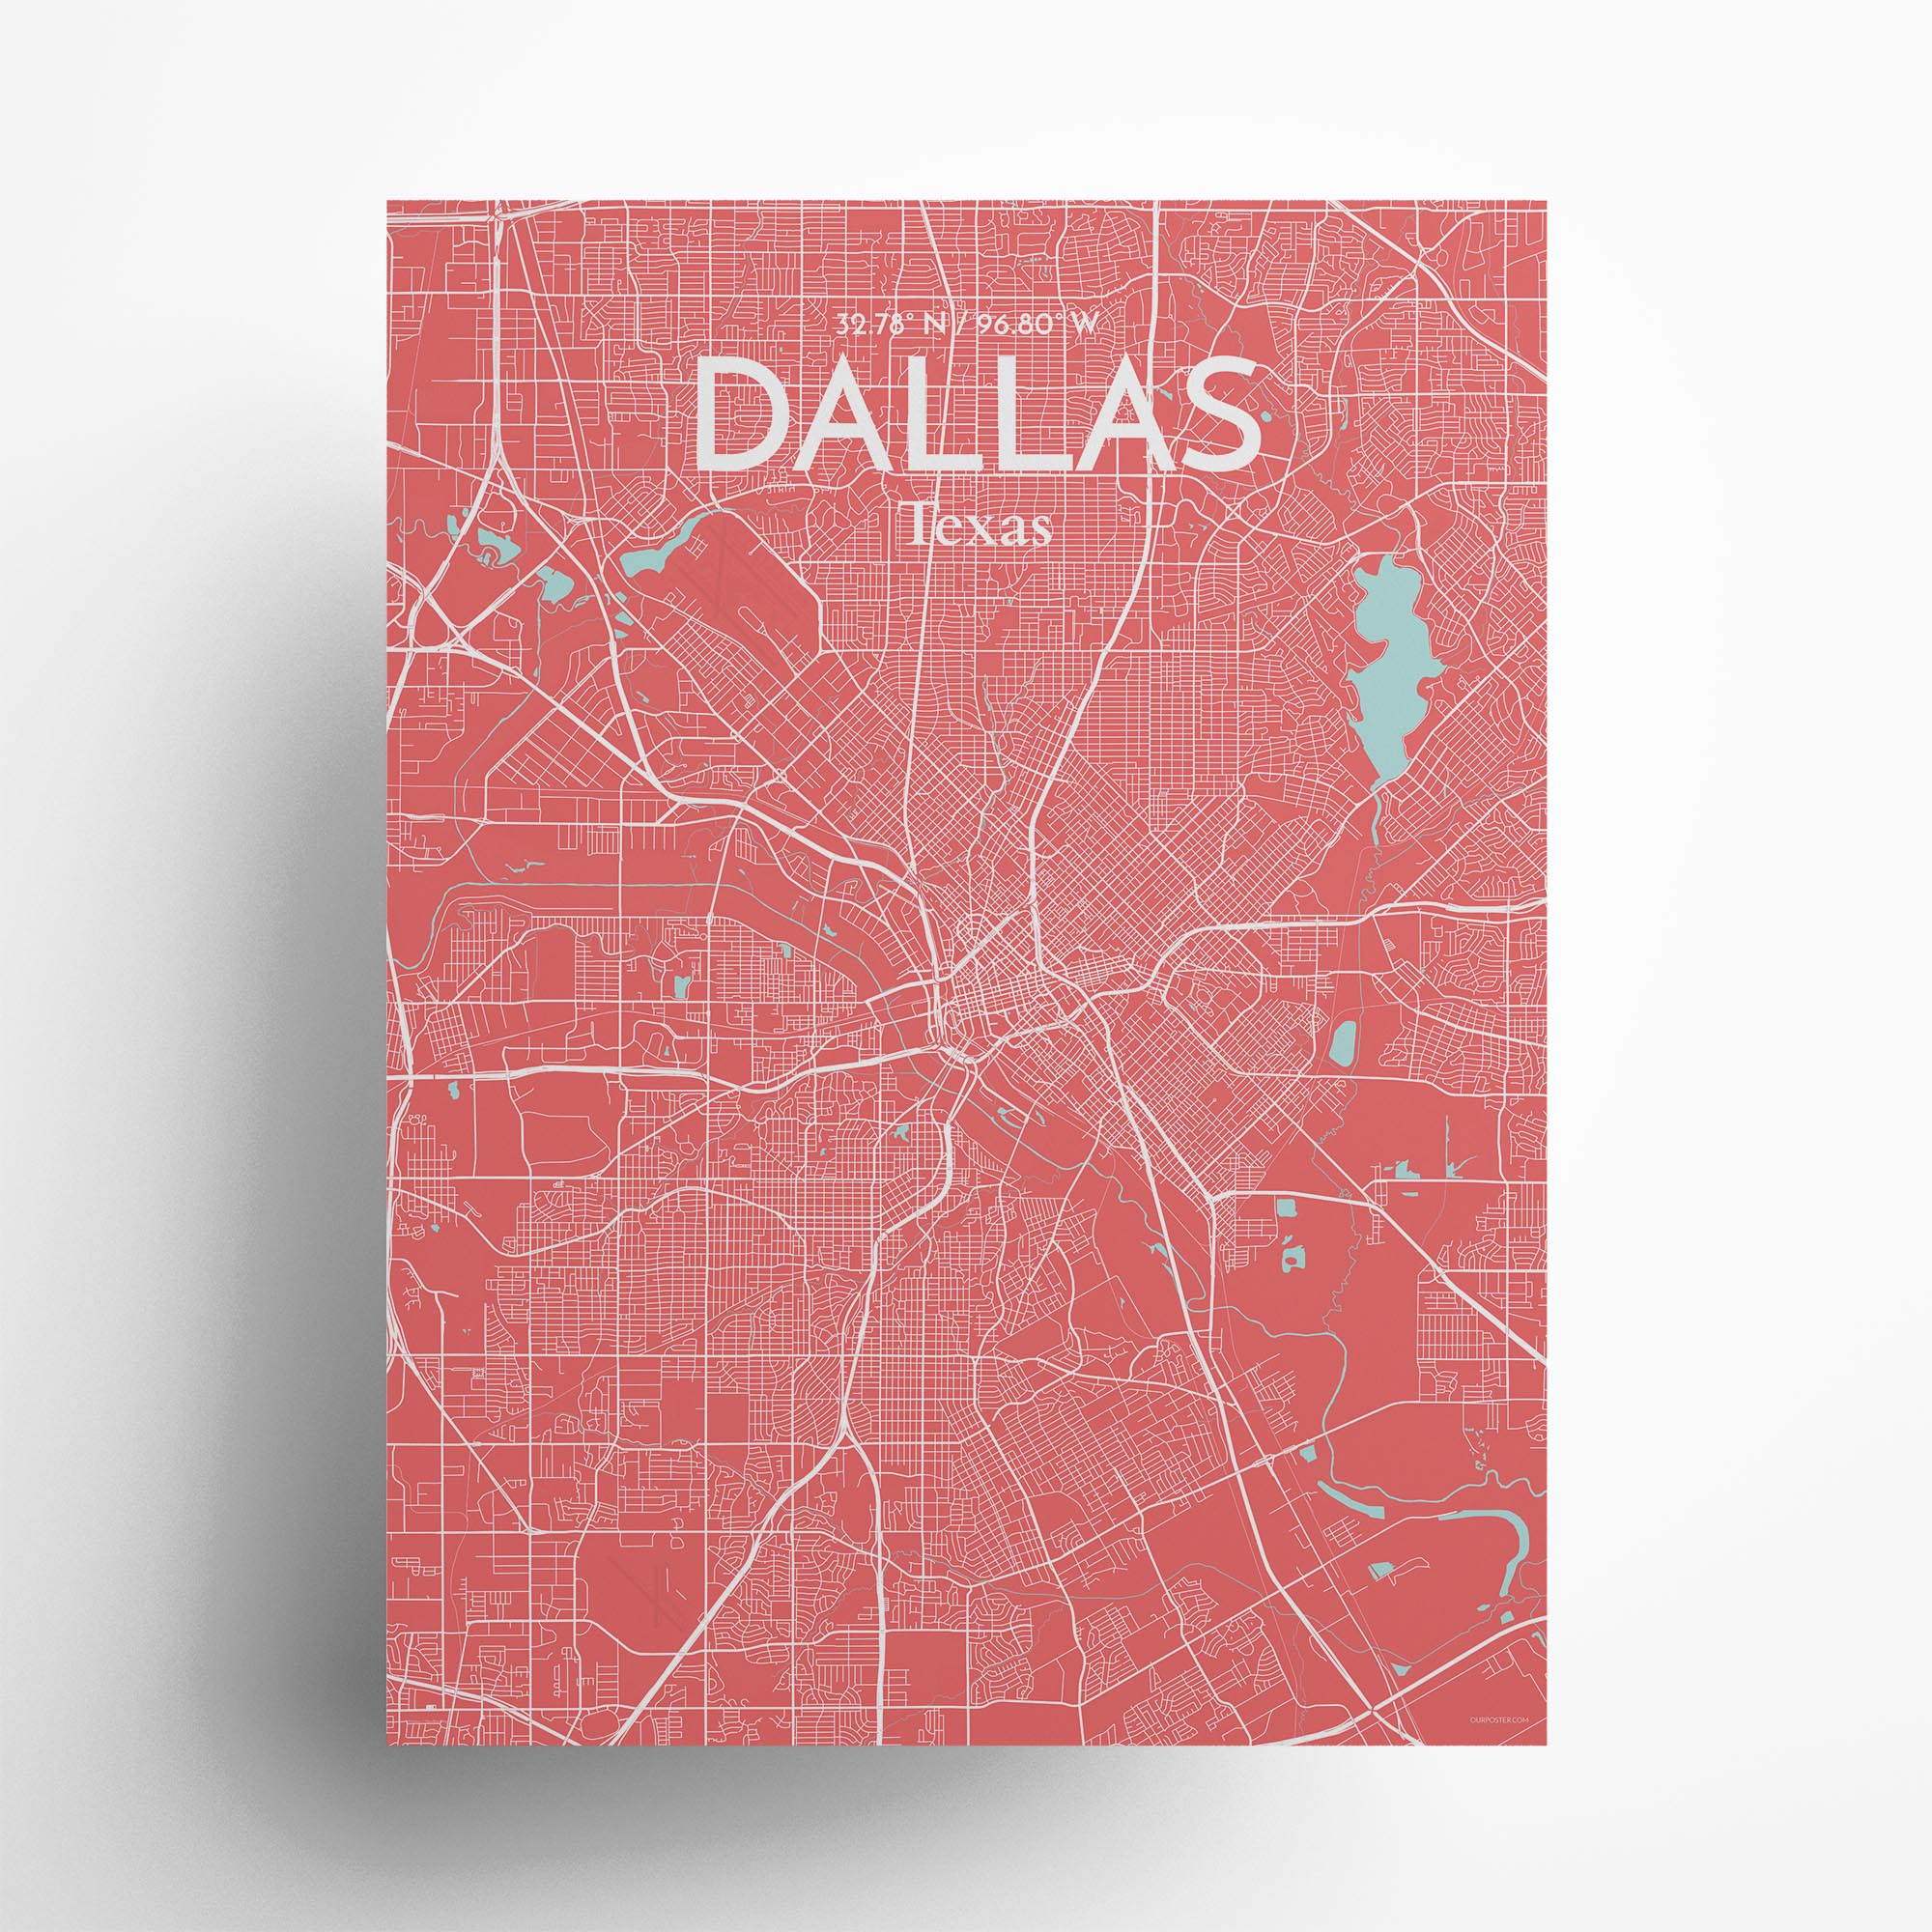 Dallas city map poster in Maritime of size 18" x 24"